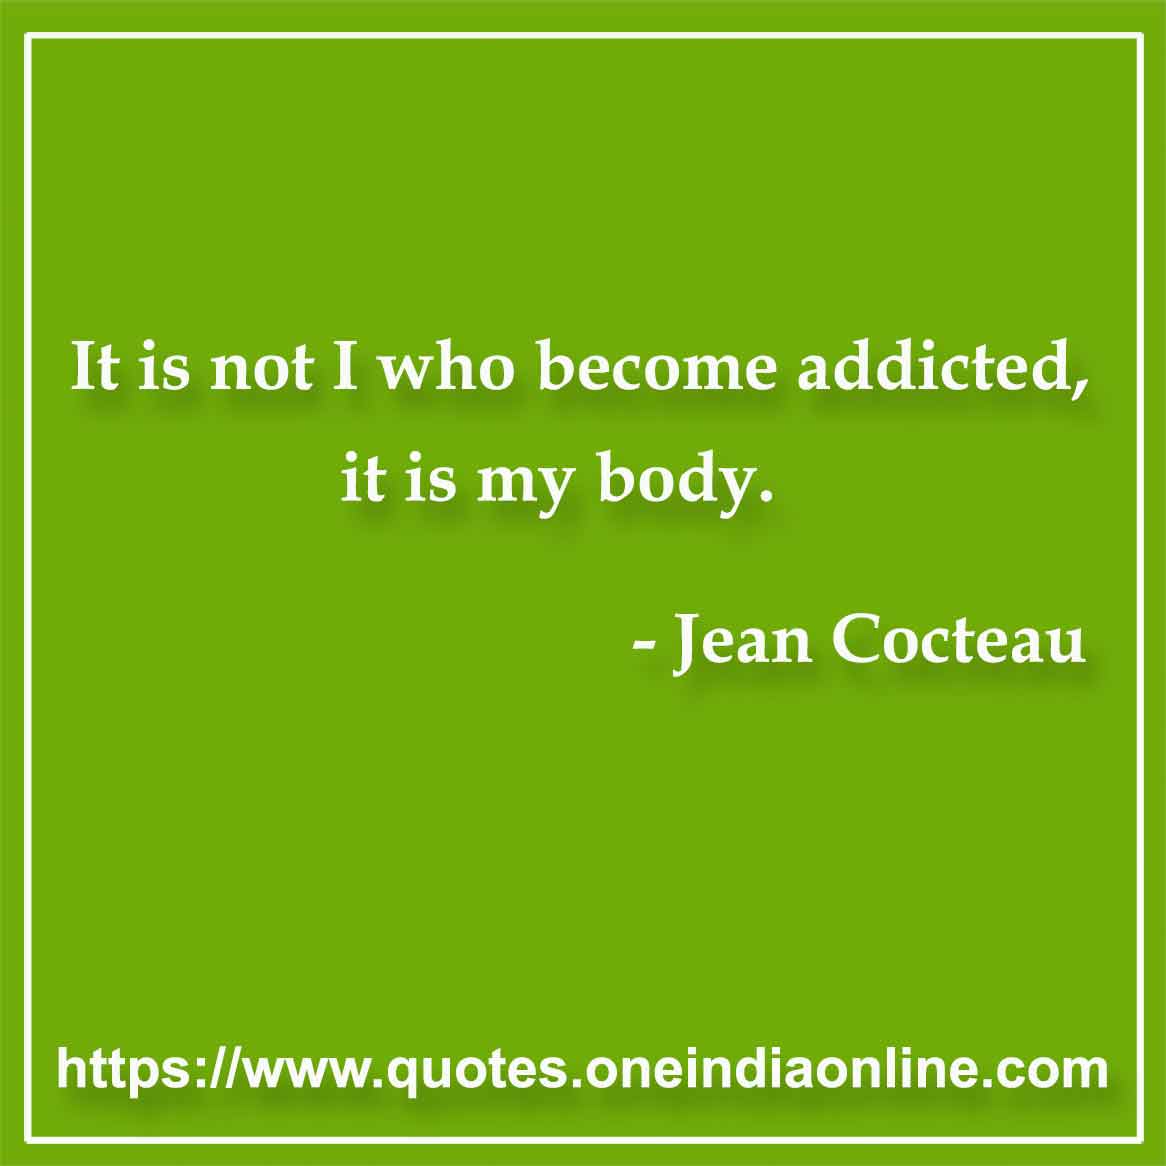 It is not I who become addicted, it is my body.

- Addiction Quote by Jean Cocteau